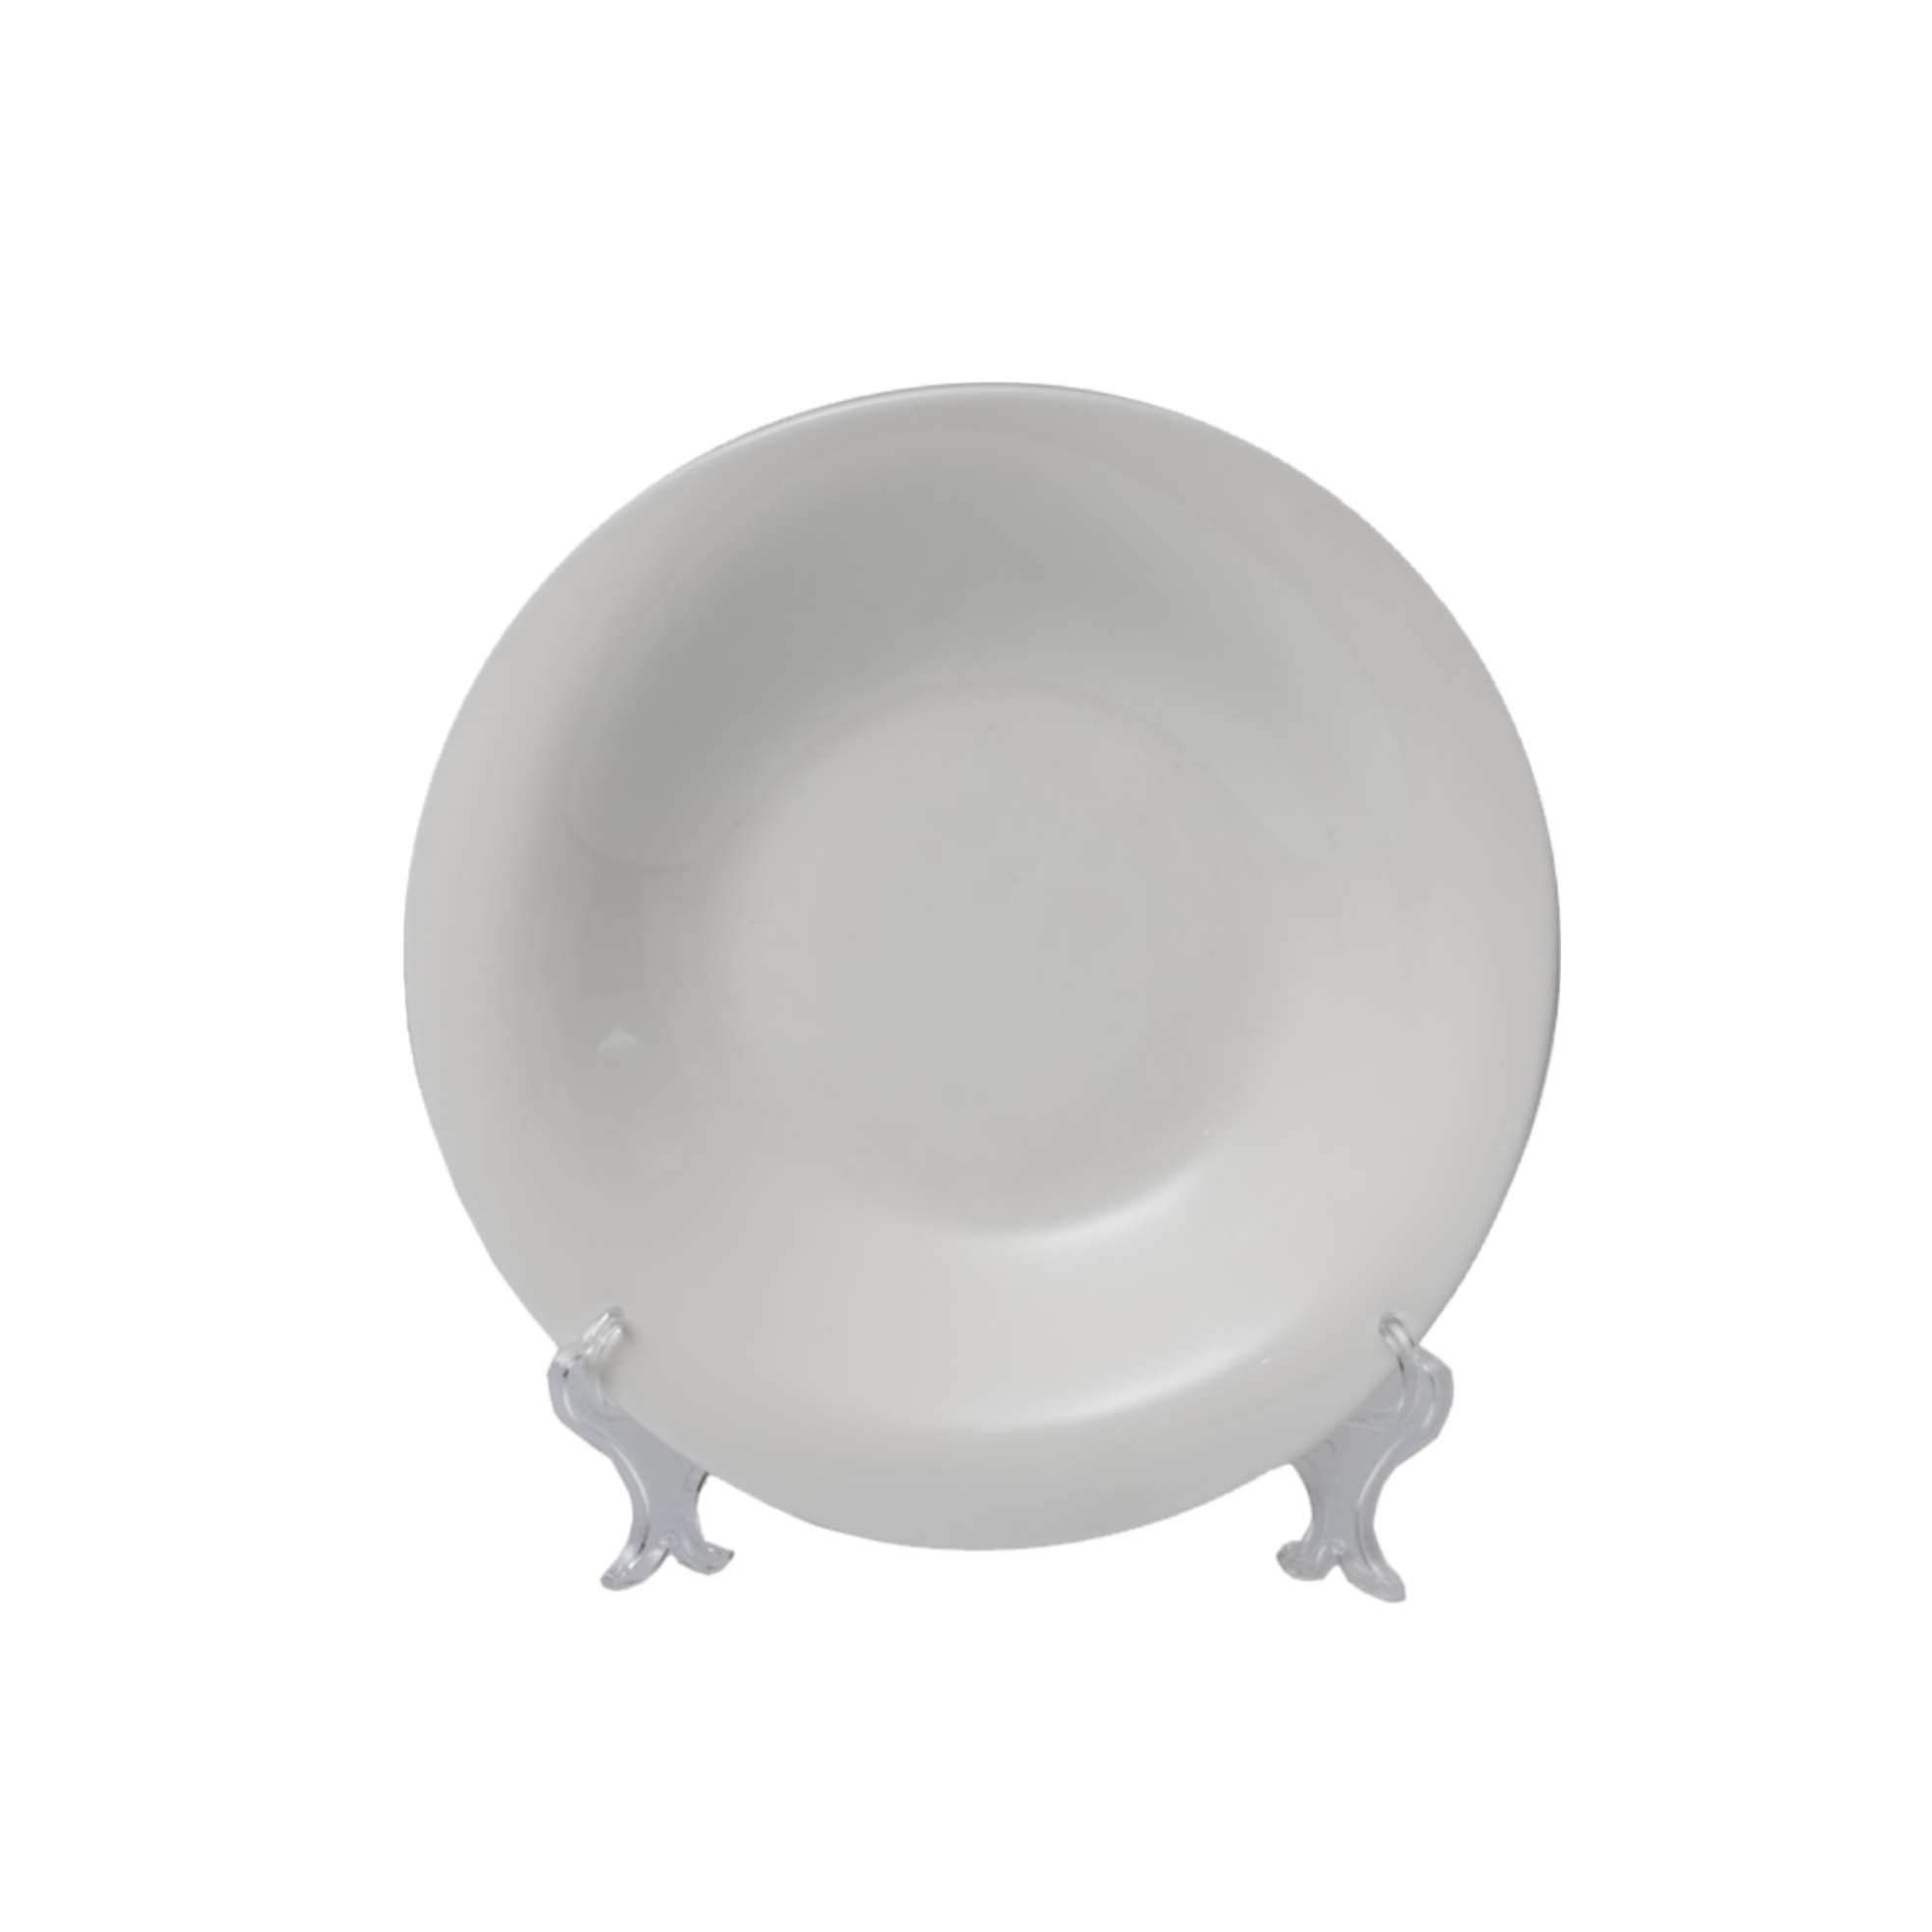 SOUP Plate Tendency cm 23 (20 each container) 